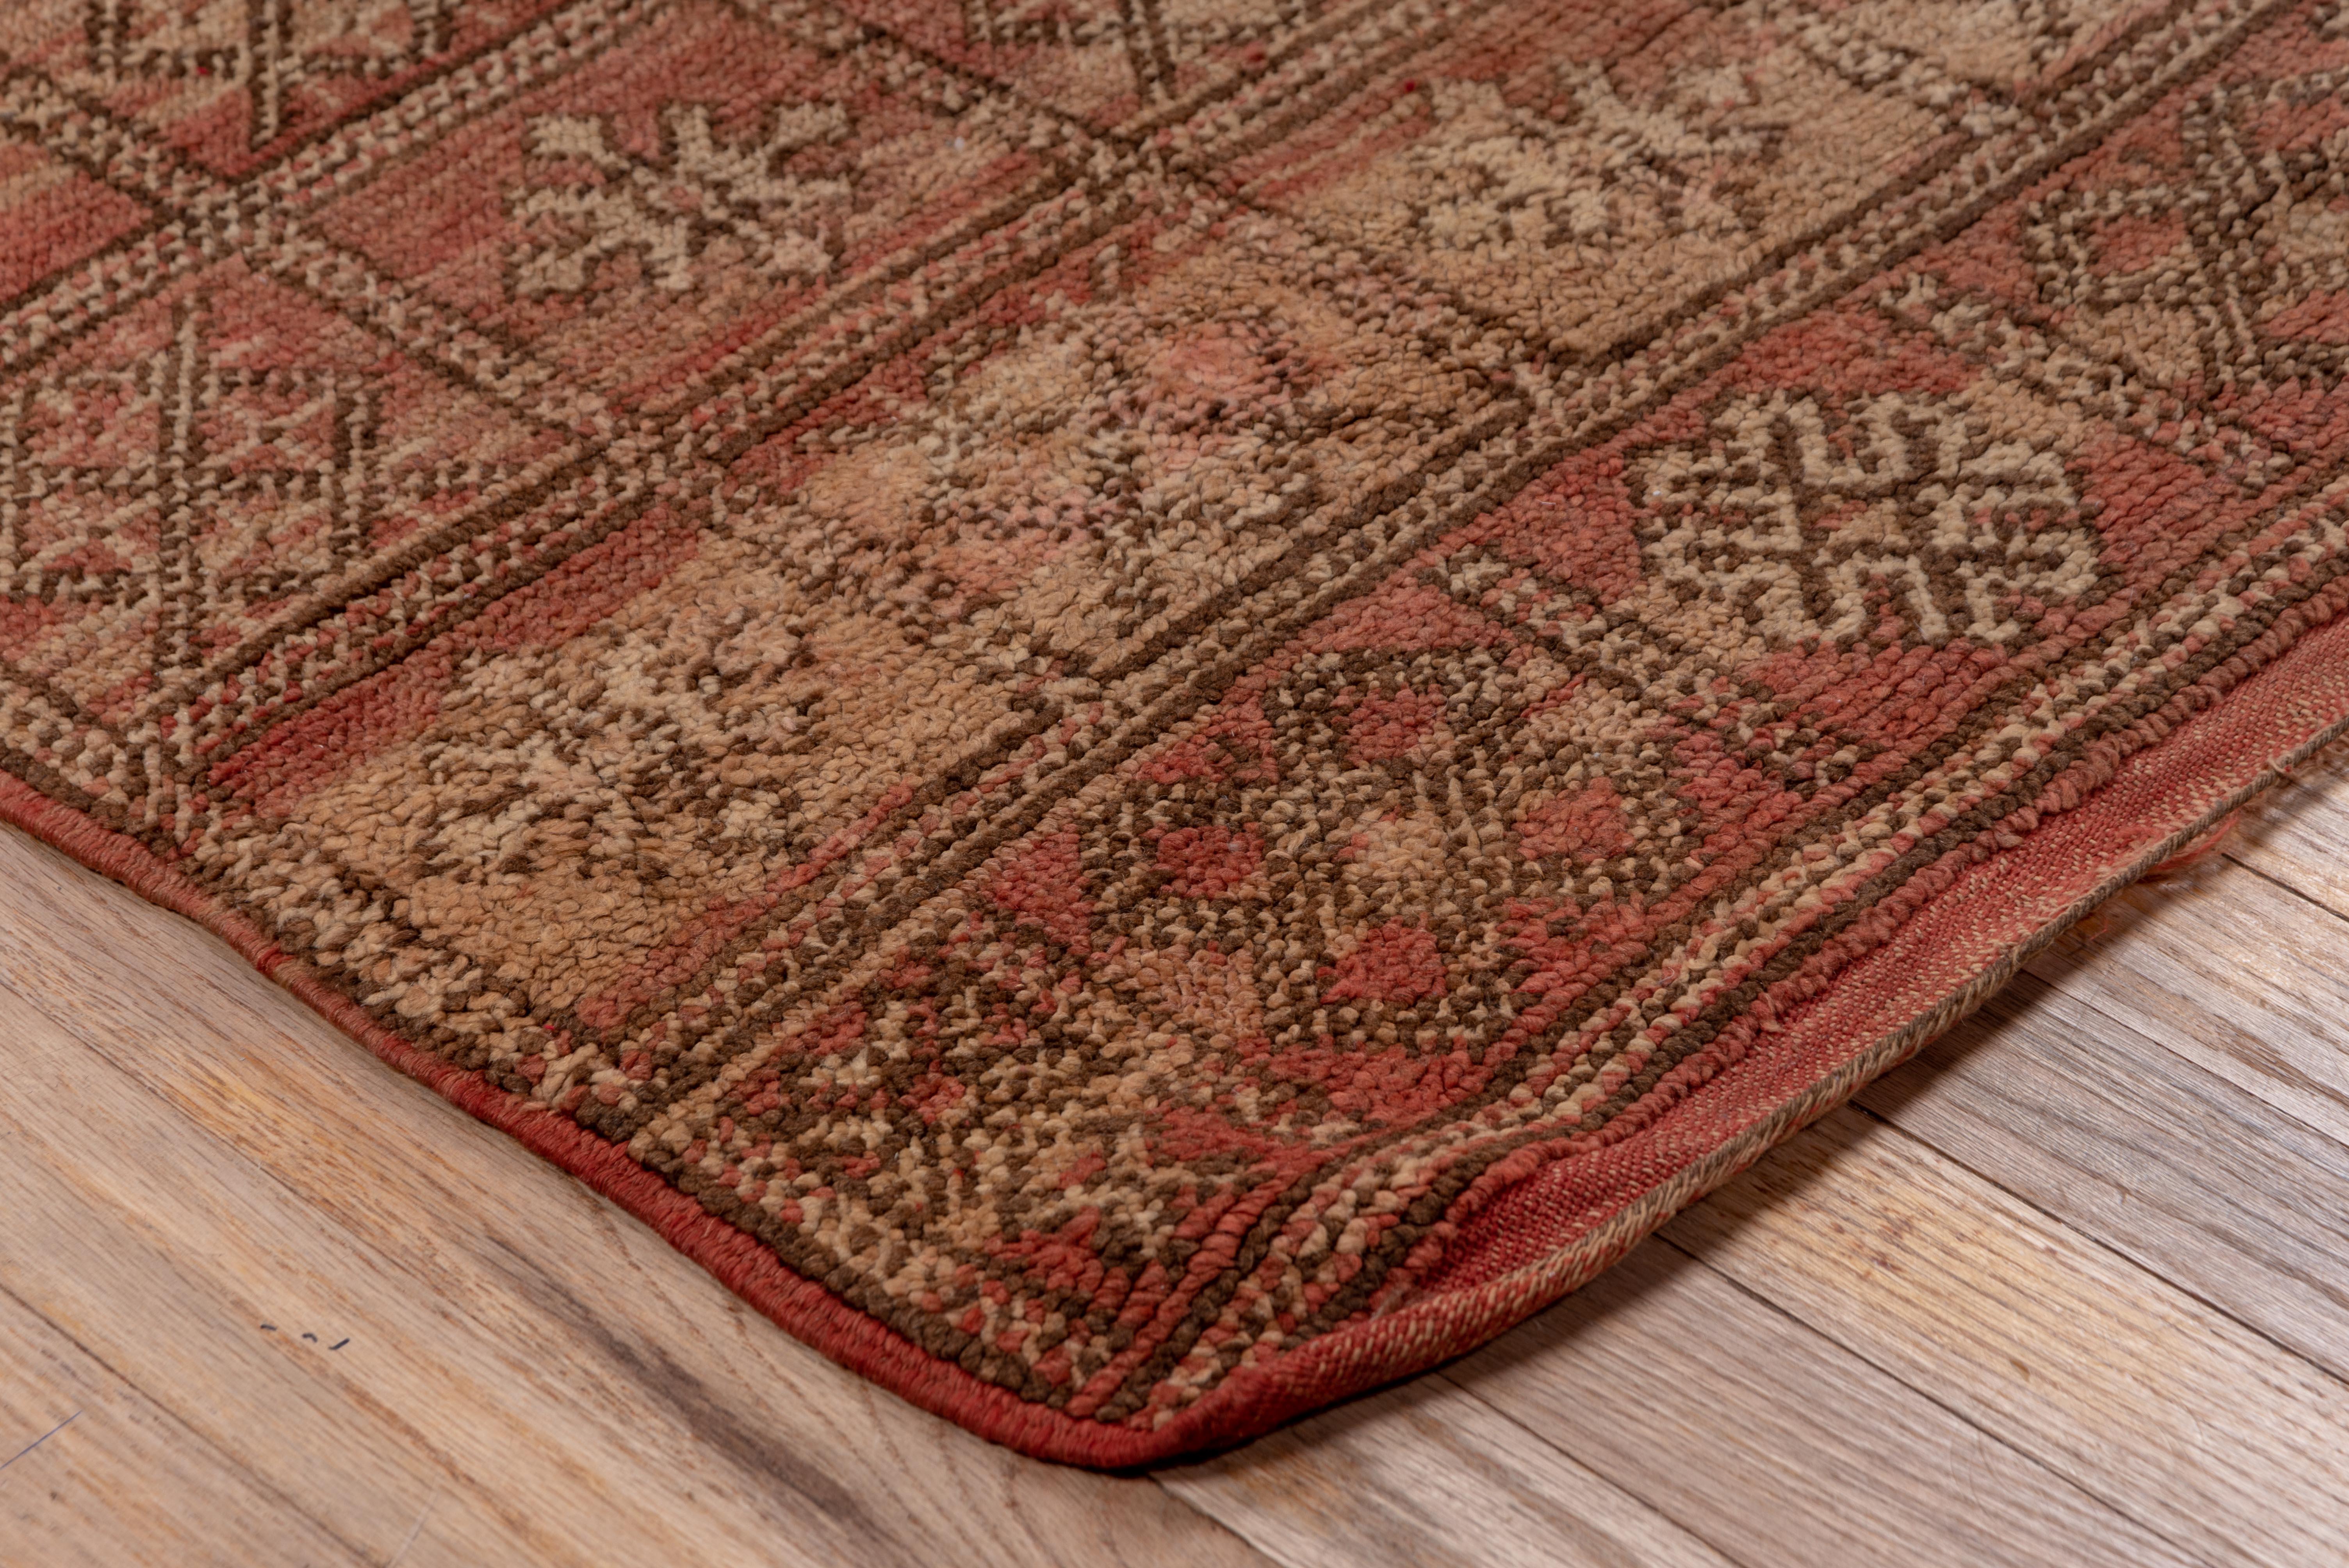 This checkered village rug out of Morocco features diamond snowflake patterns - the red dye remains strong and in tact, showing even more beauty with age